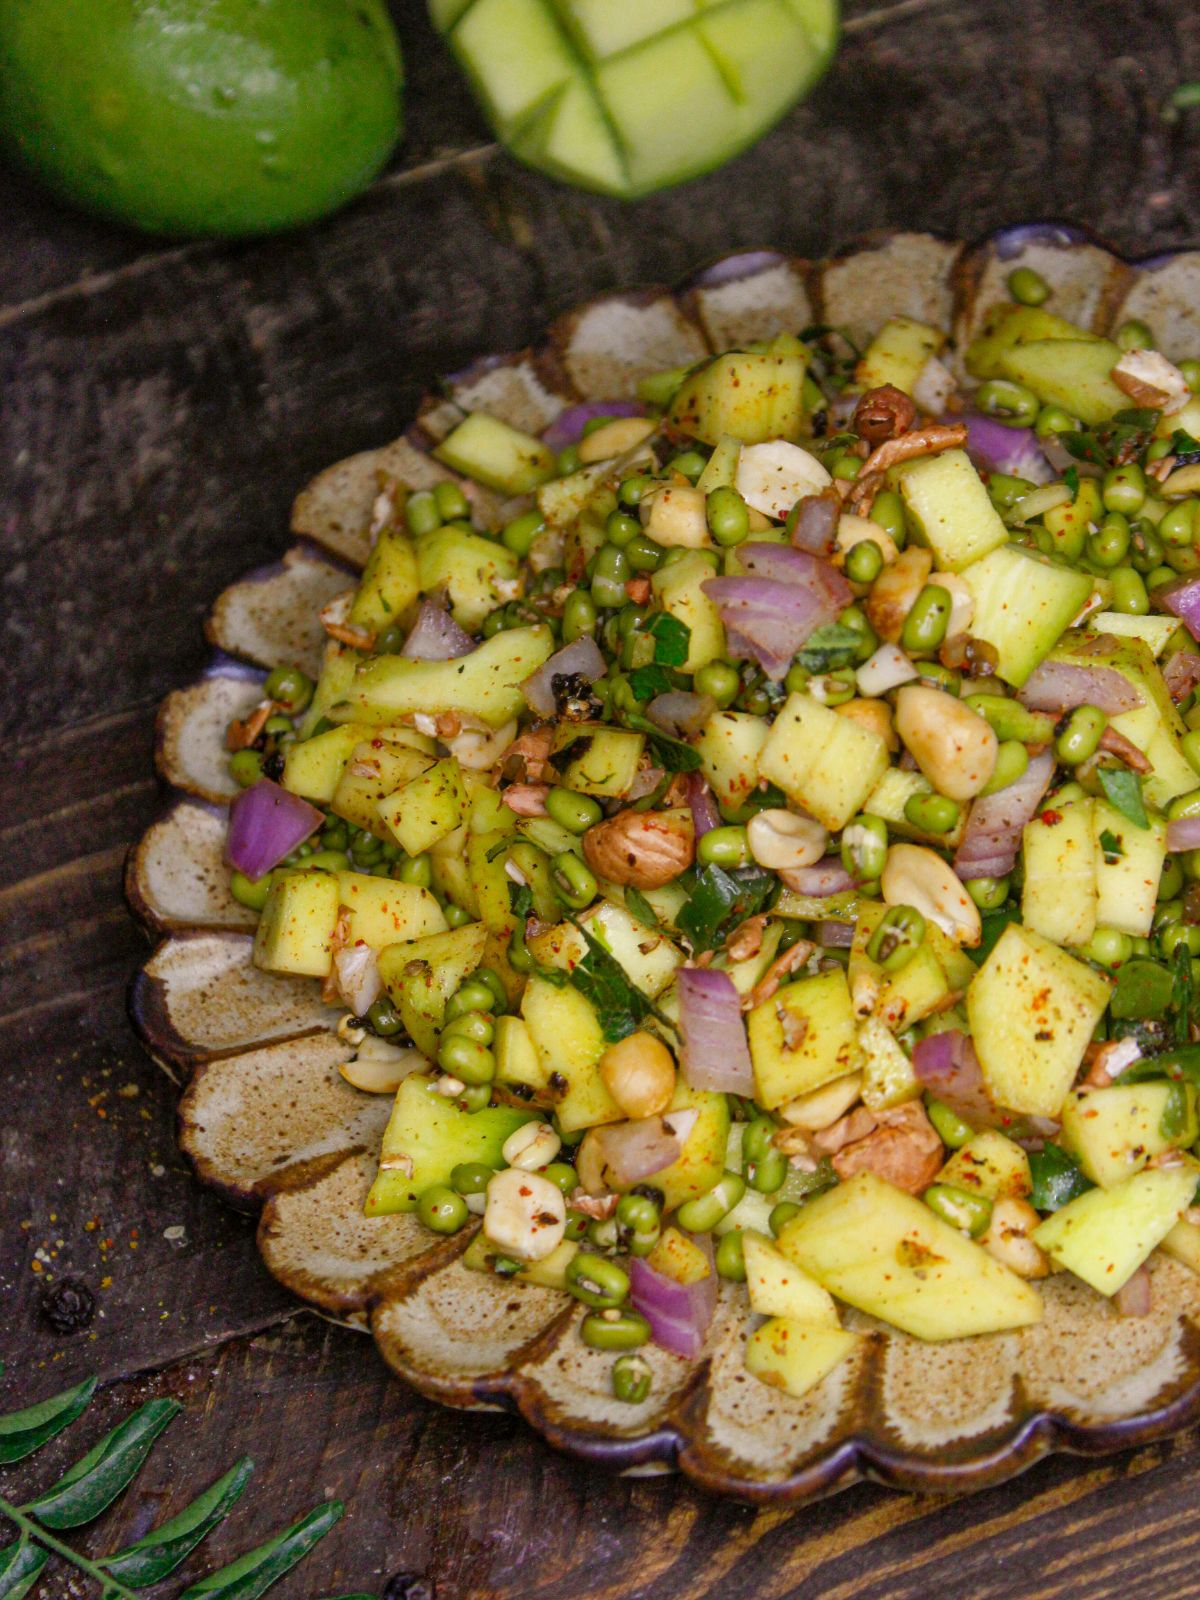 Top view half plate image of South Indian Raw Mango Salad with Sprouts